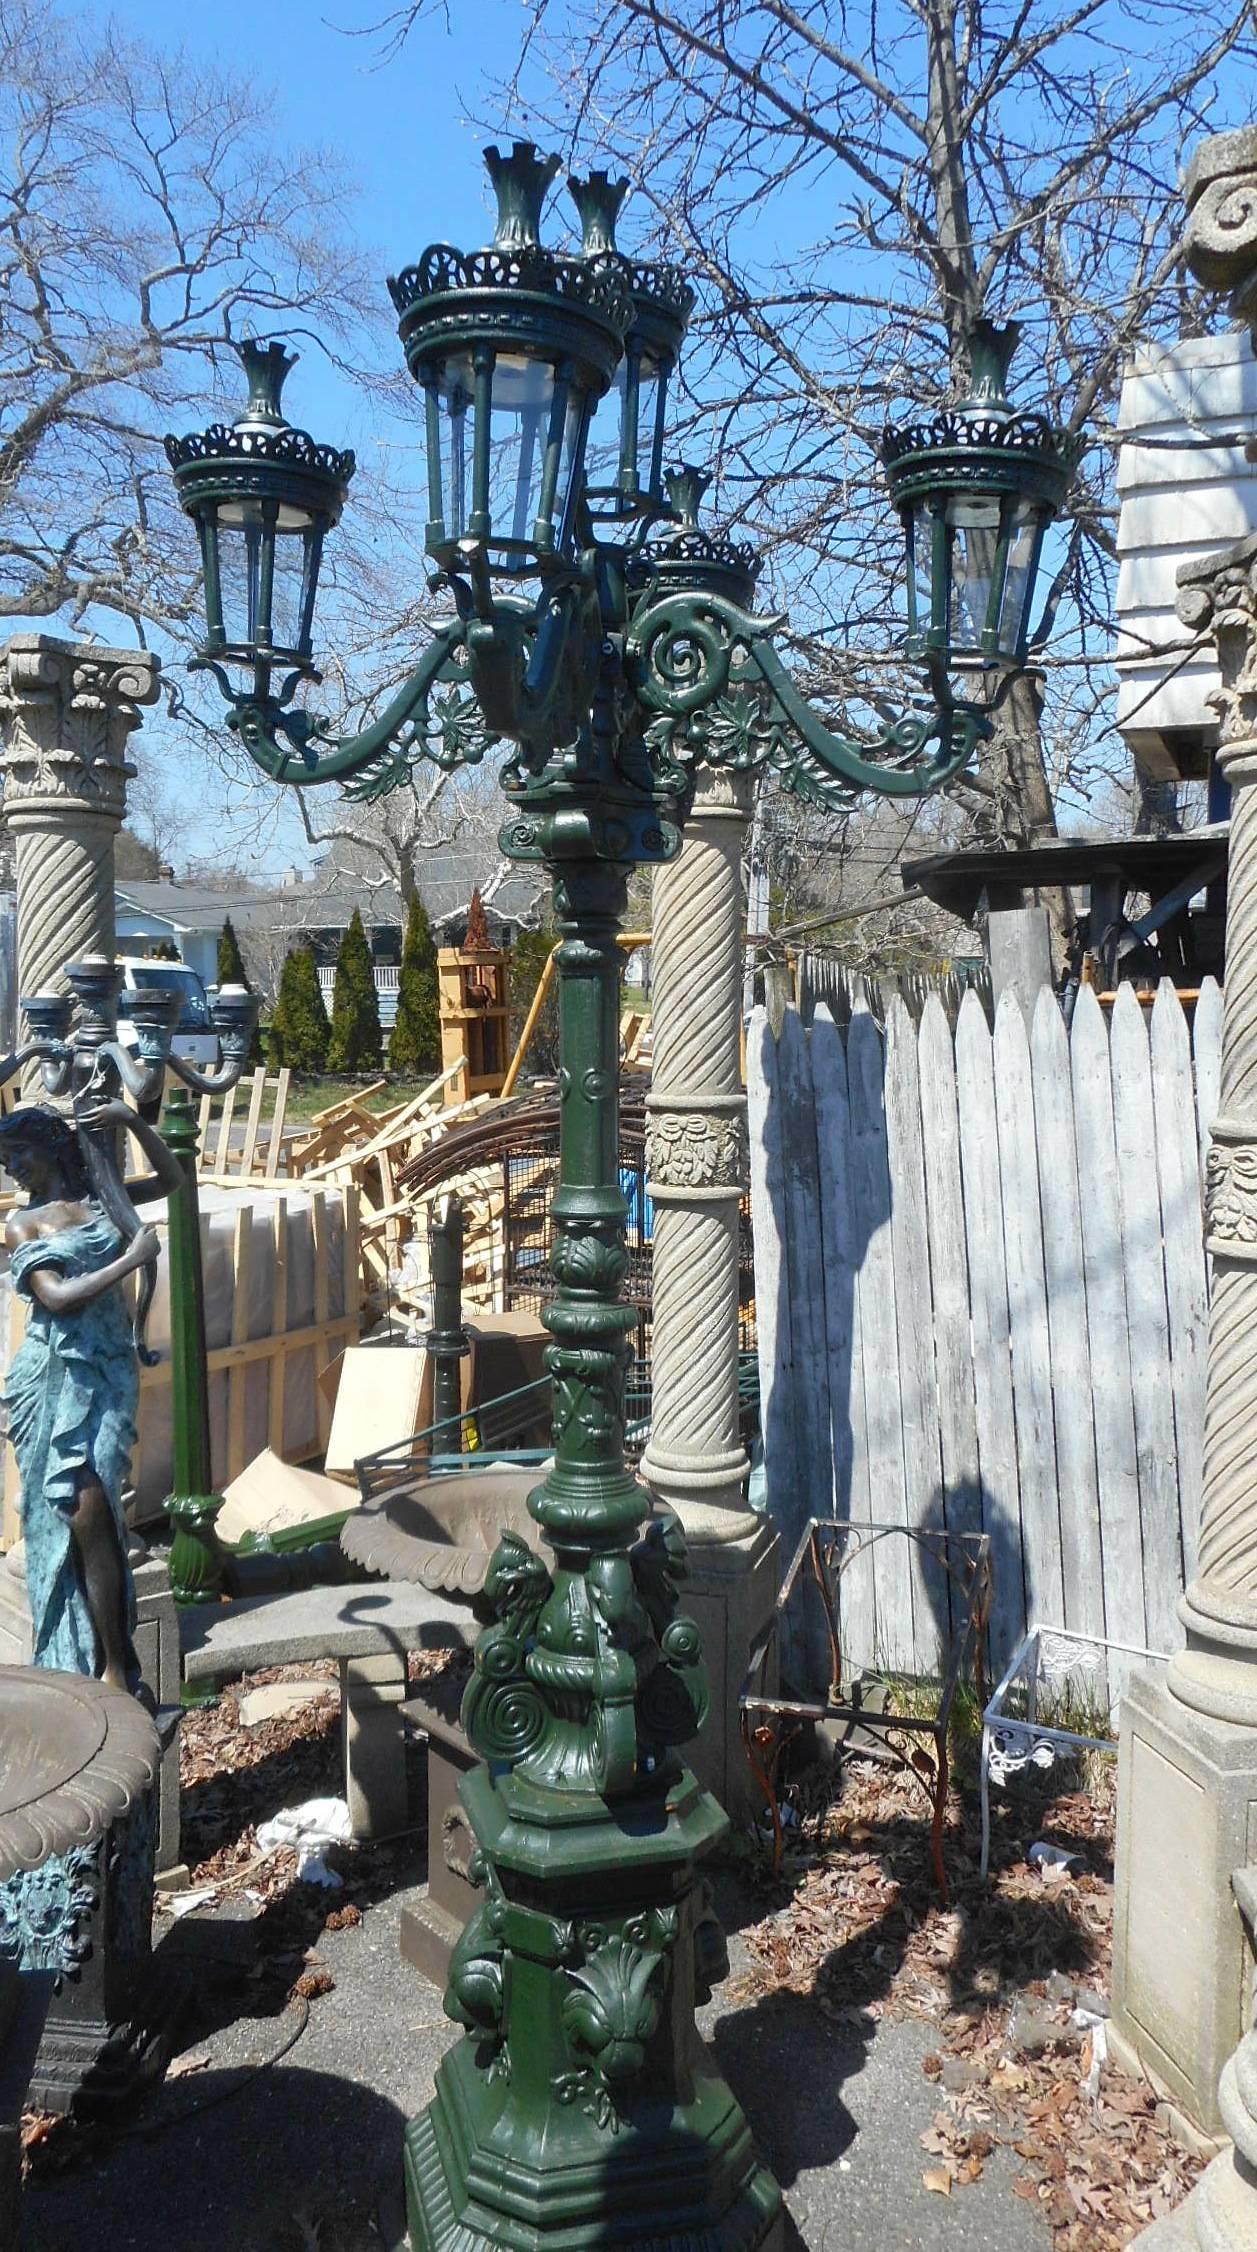 This impressive cast iron street lamp has five lanterns on the top and sits on top of a large pedestal base. Wonderful design with cast lions along the base and four arms on the top with scroll detail. This amazing 10 foot tall piece is sure to make